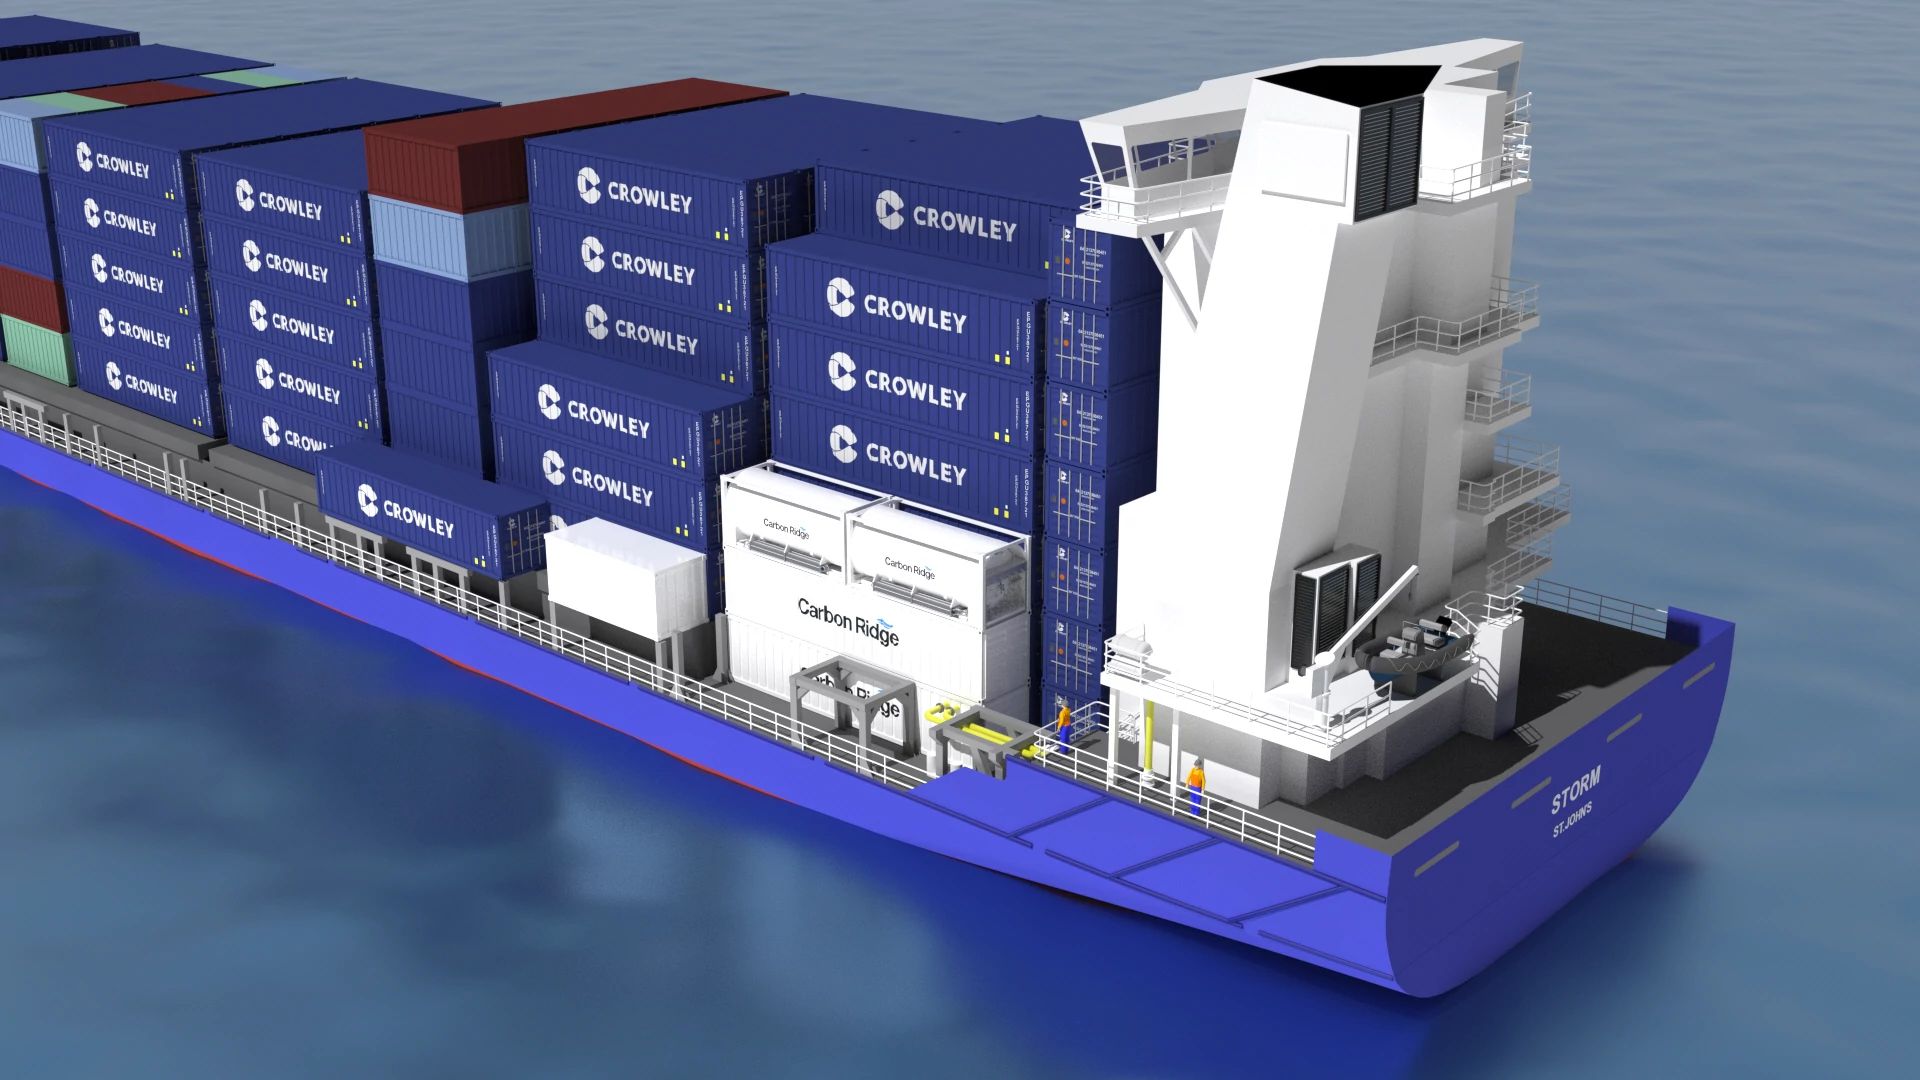 An illustration of Carbon Ridge's pilot carbon capture system installed on the M/V Storm. Image courtesy Crowley